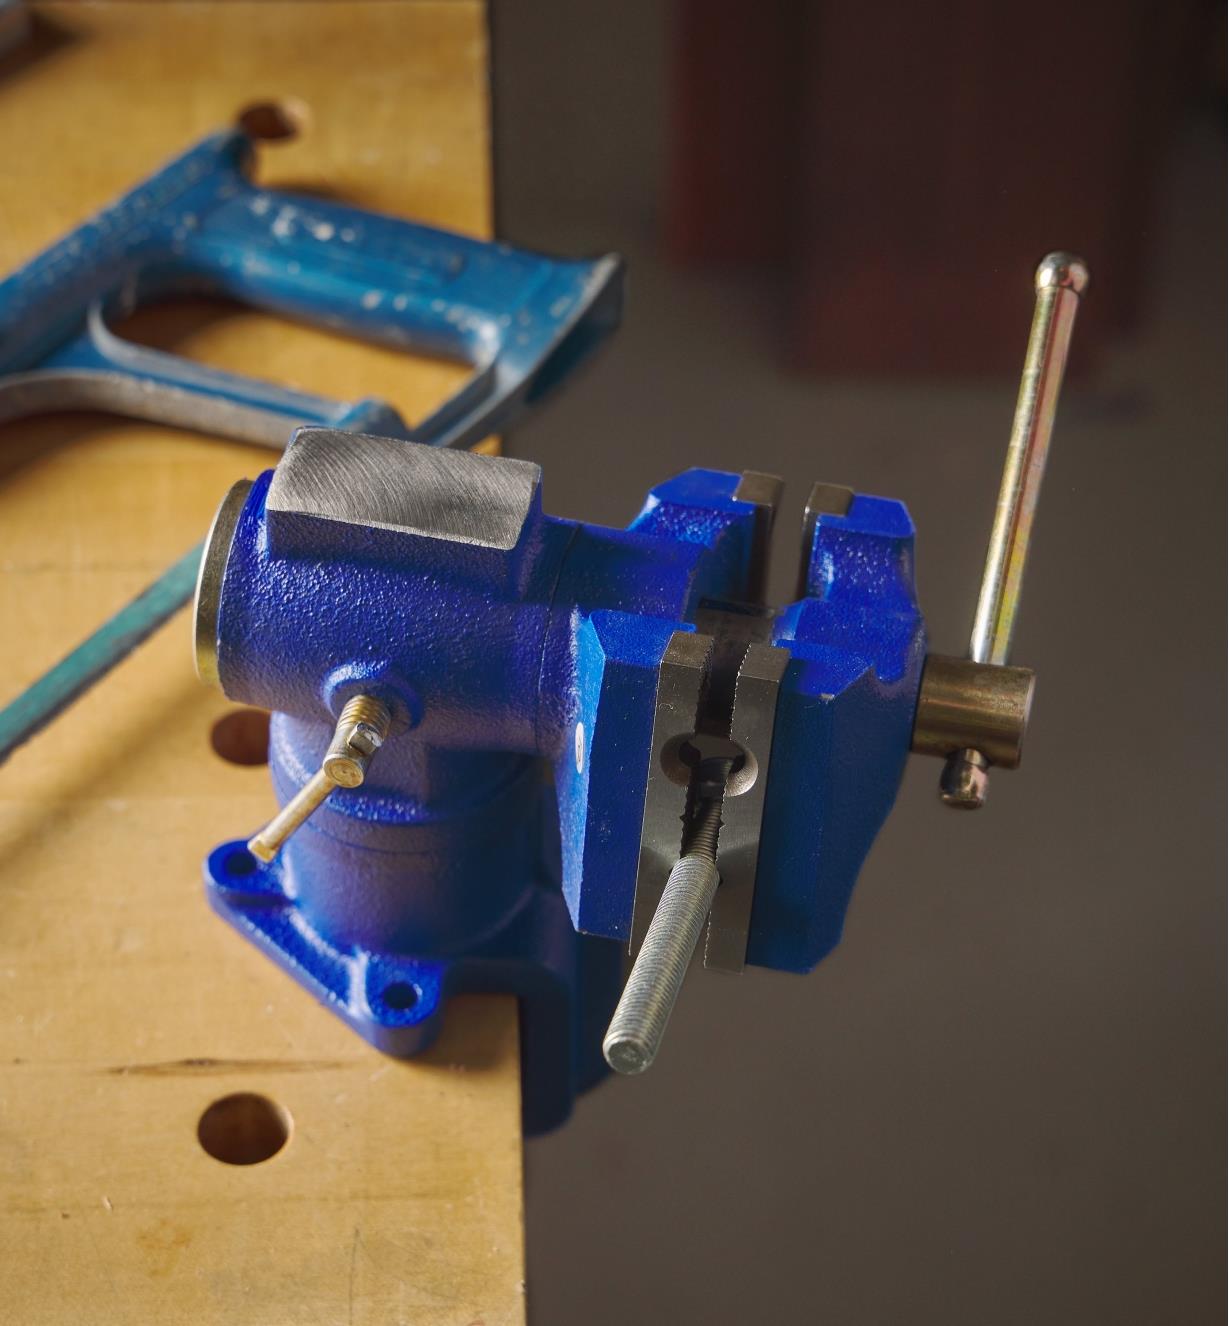 70G0102 - Clamp-On Articulating Vise